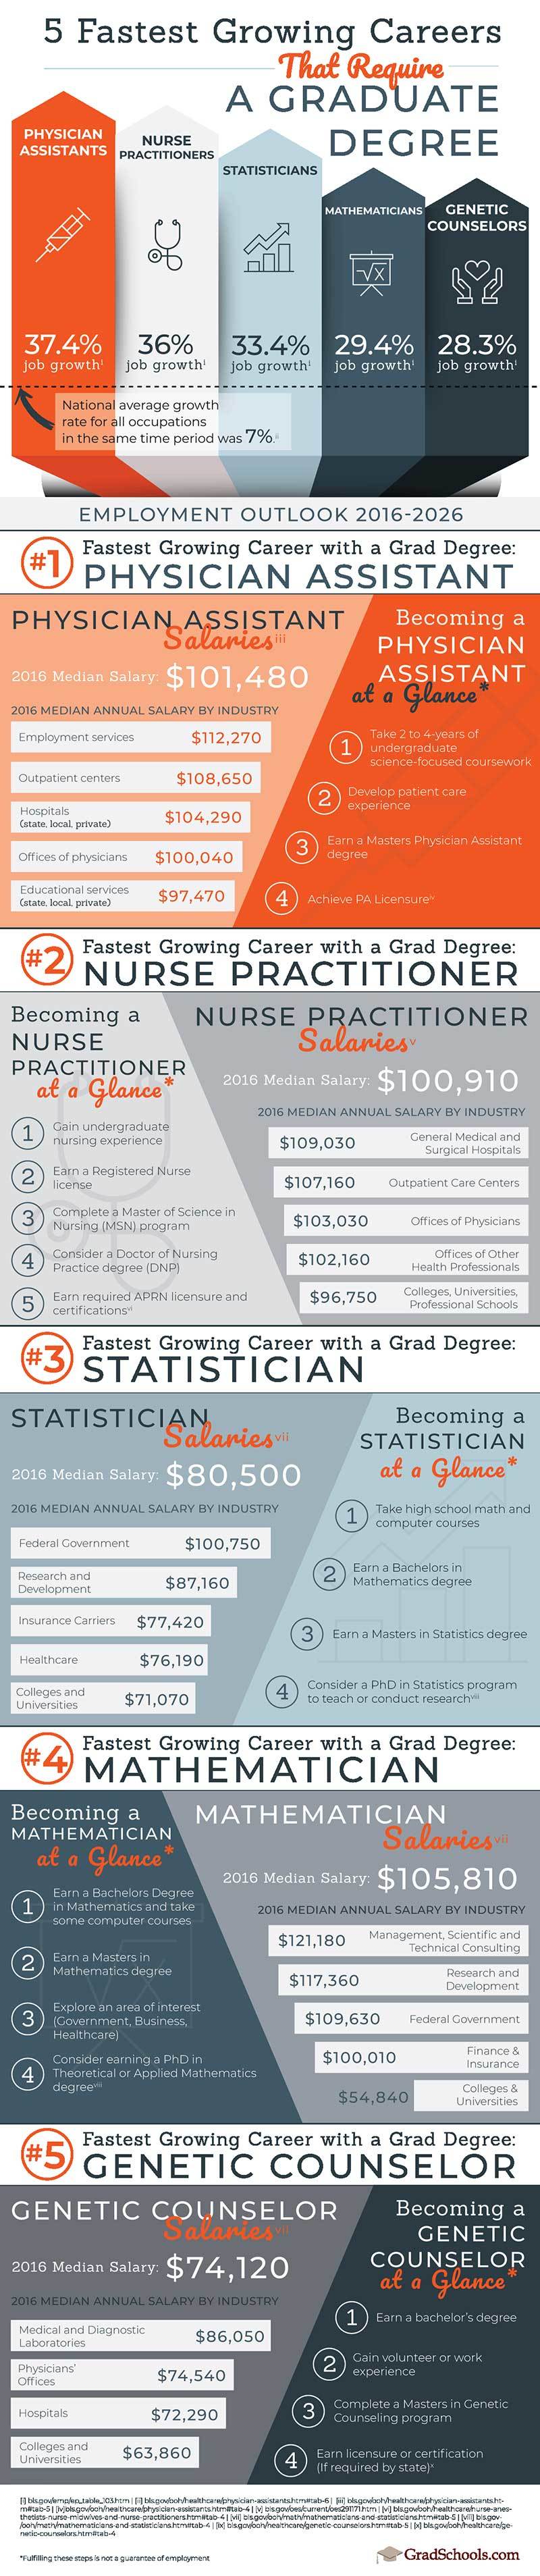 5 Fastest Growing Careers that Require a Graduate Degree Infographic